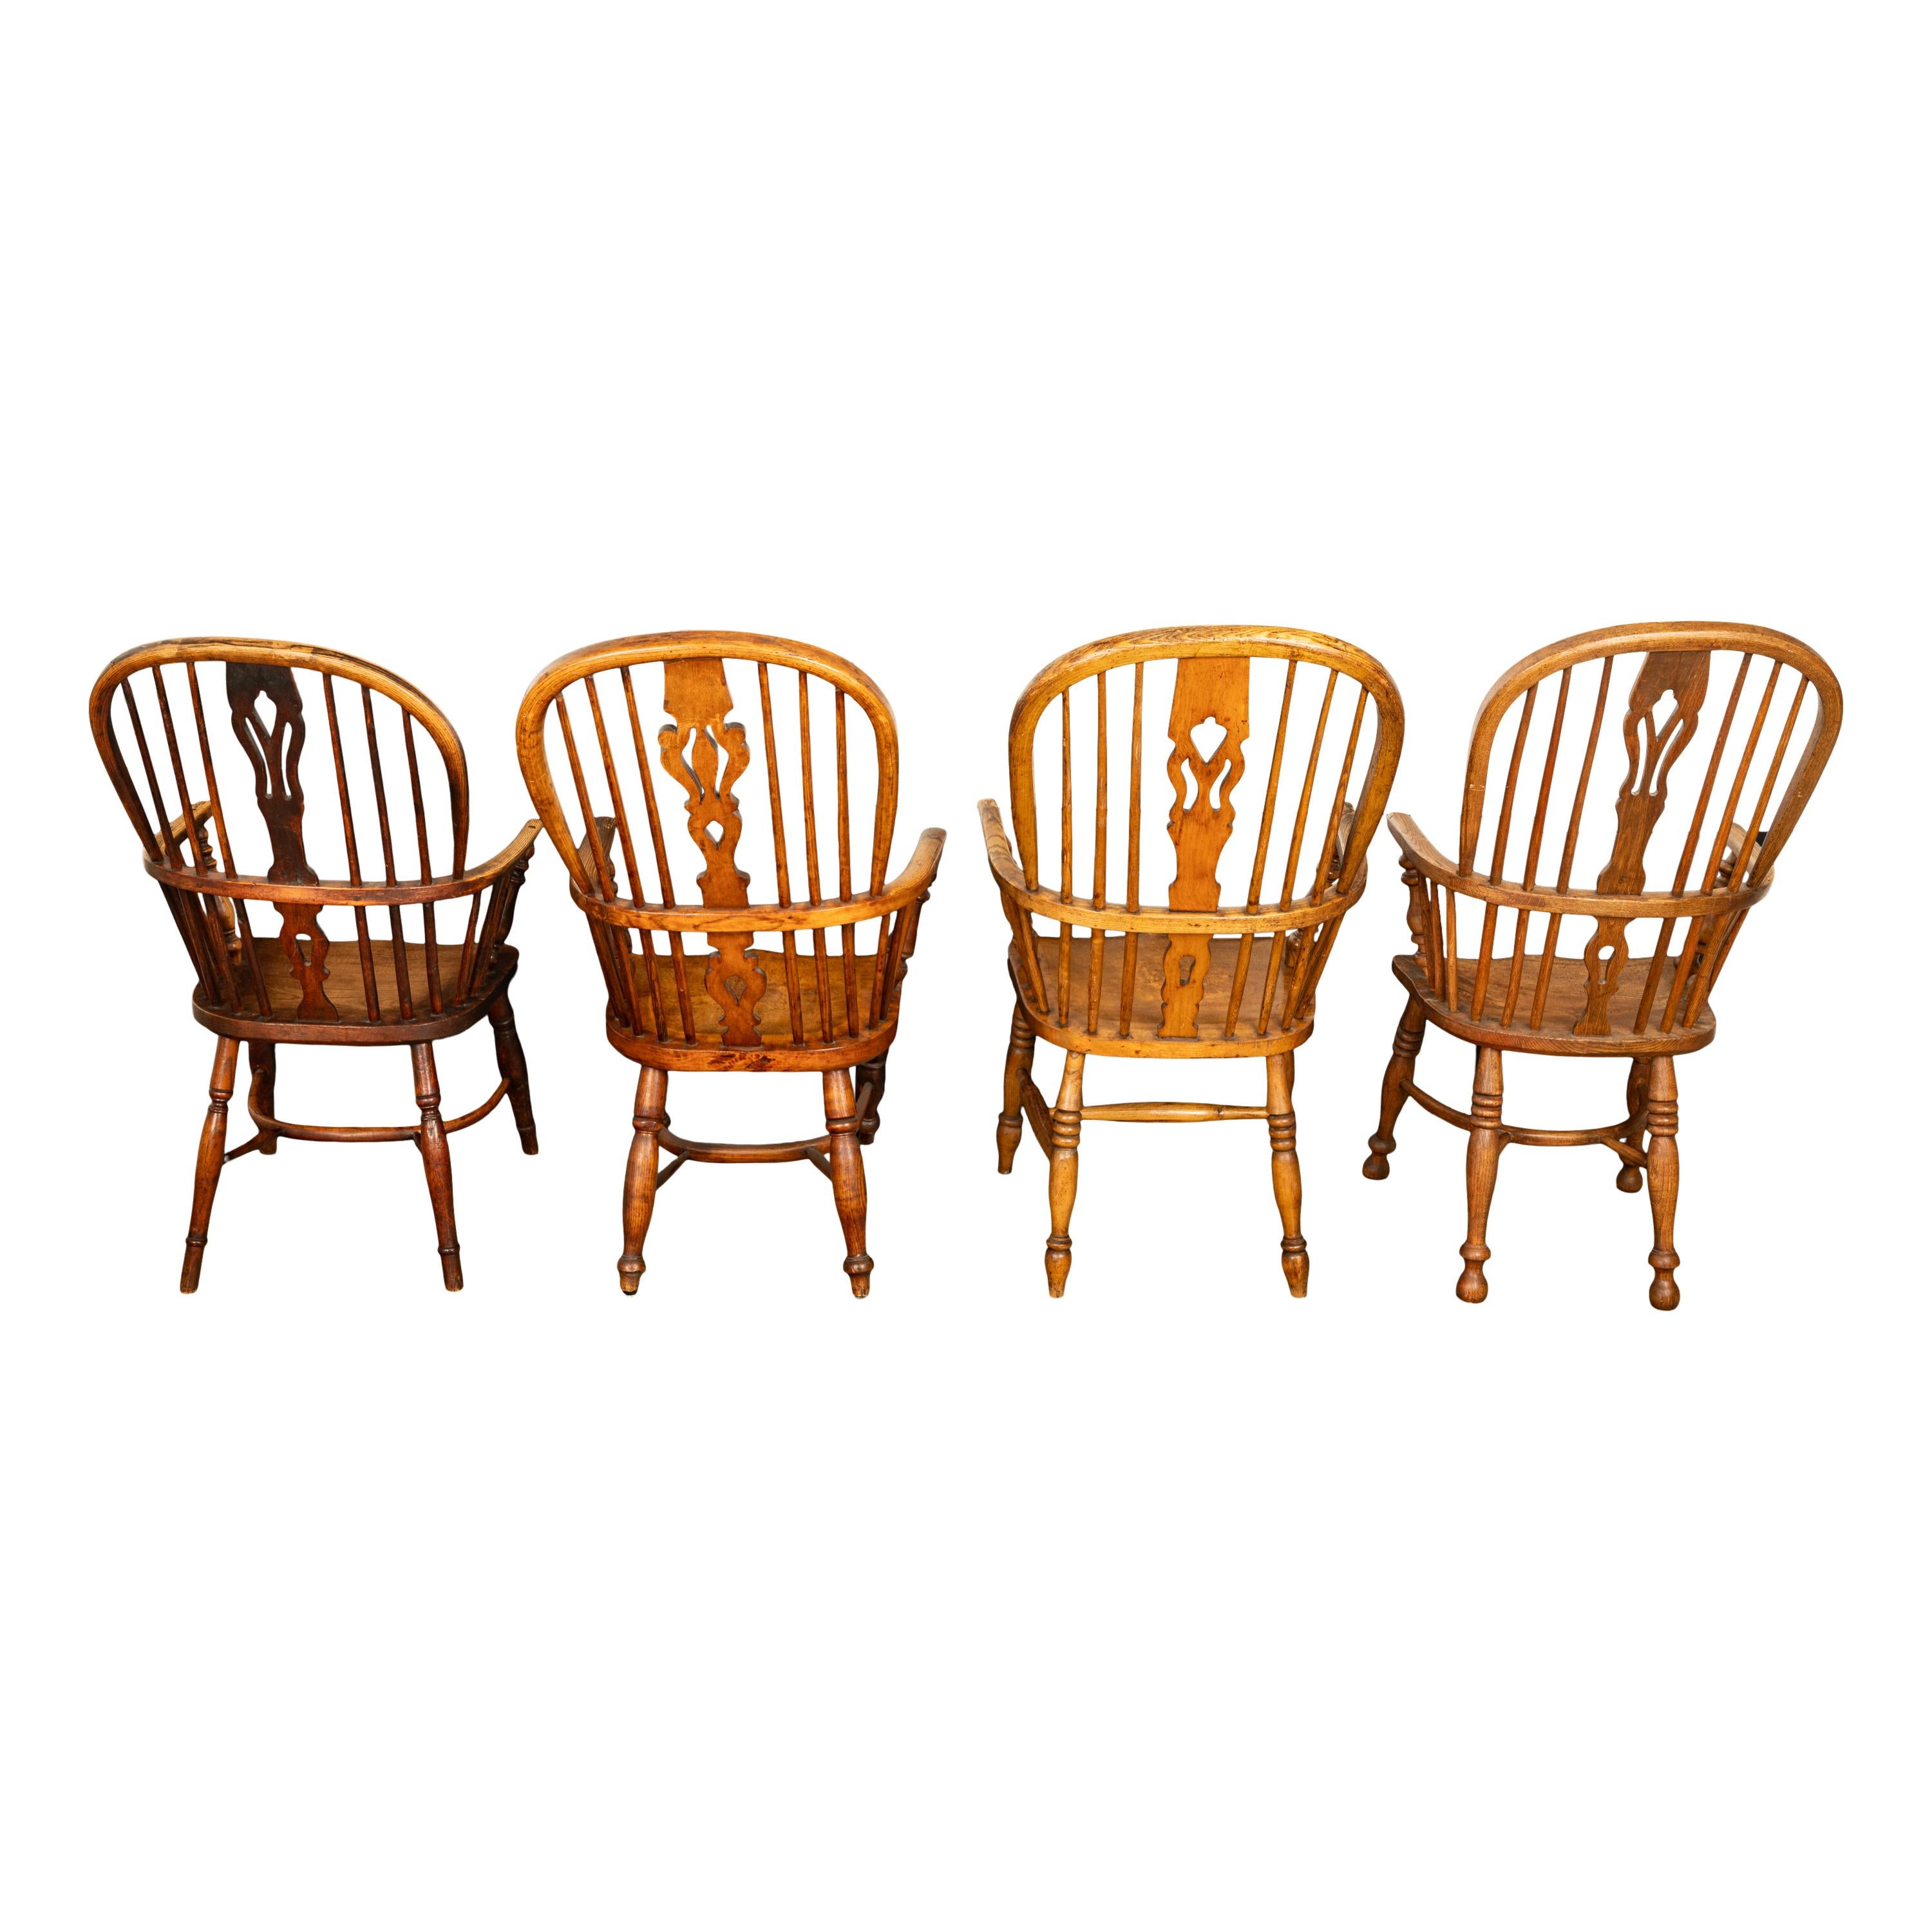 Set 4 Antique 19thC High-backed English Ash Elm Country Windsor Arm Chairs 1840  For Sale 3